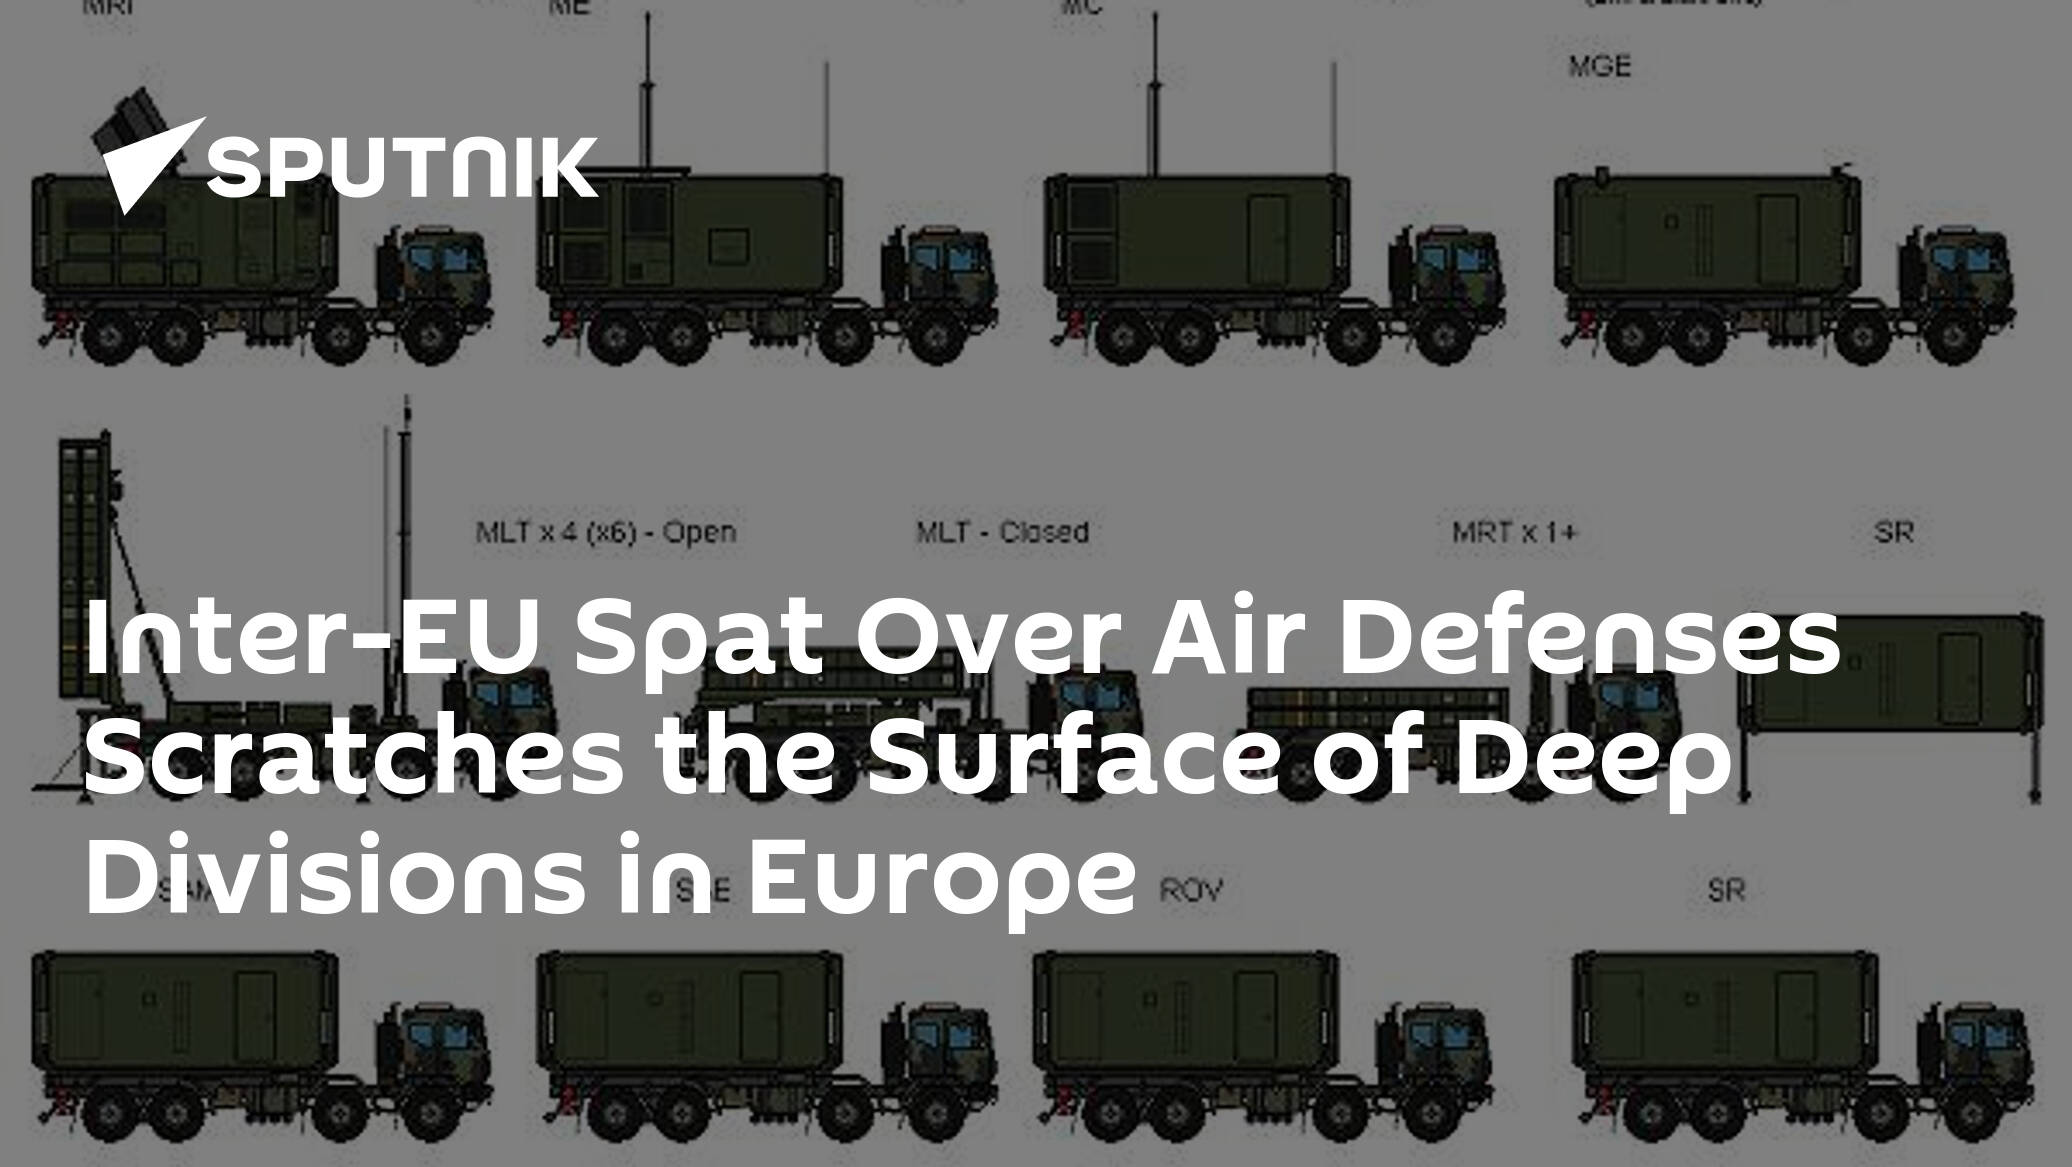 Inter-EU Spat Over Air Defenses Scratches the Surface of Deep Divisions in Europe